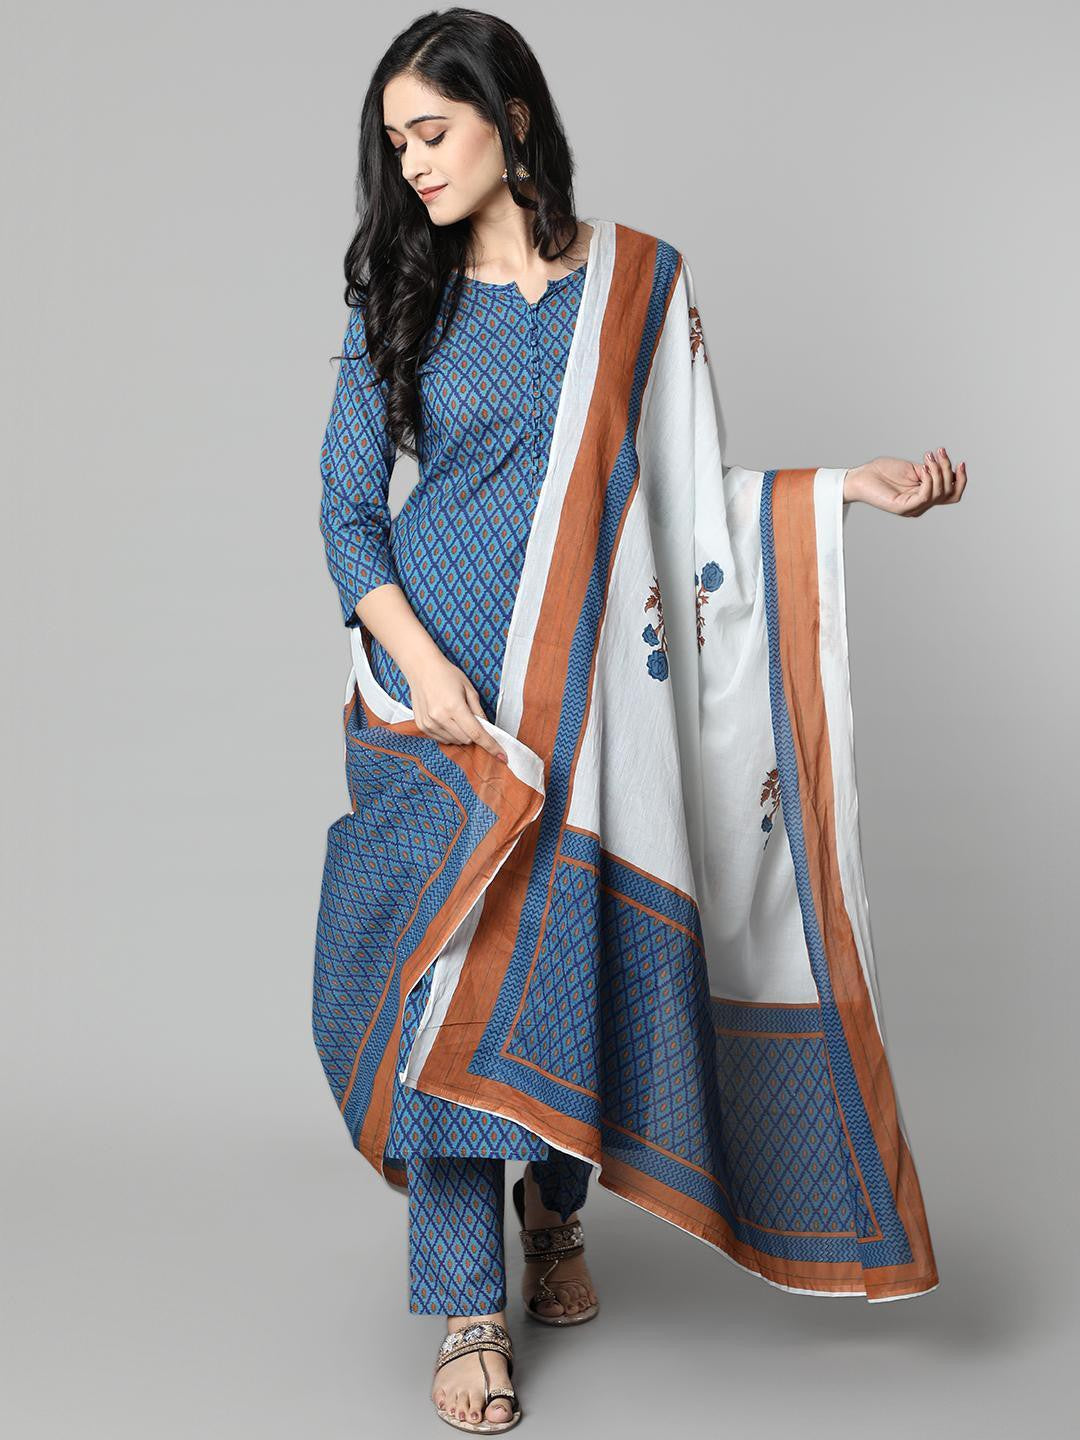 Women's Blue Printed Rayon Kurti Collection - Final Clearance Sale